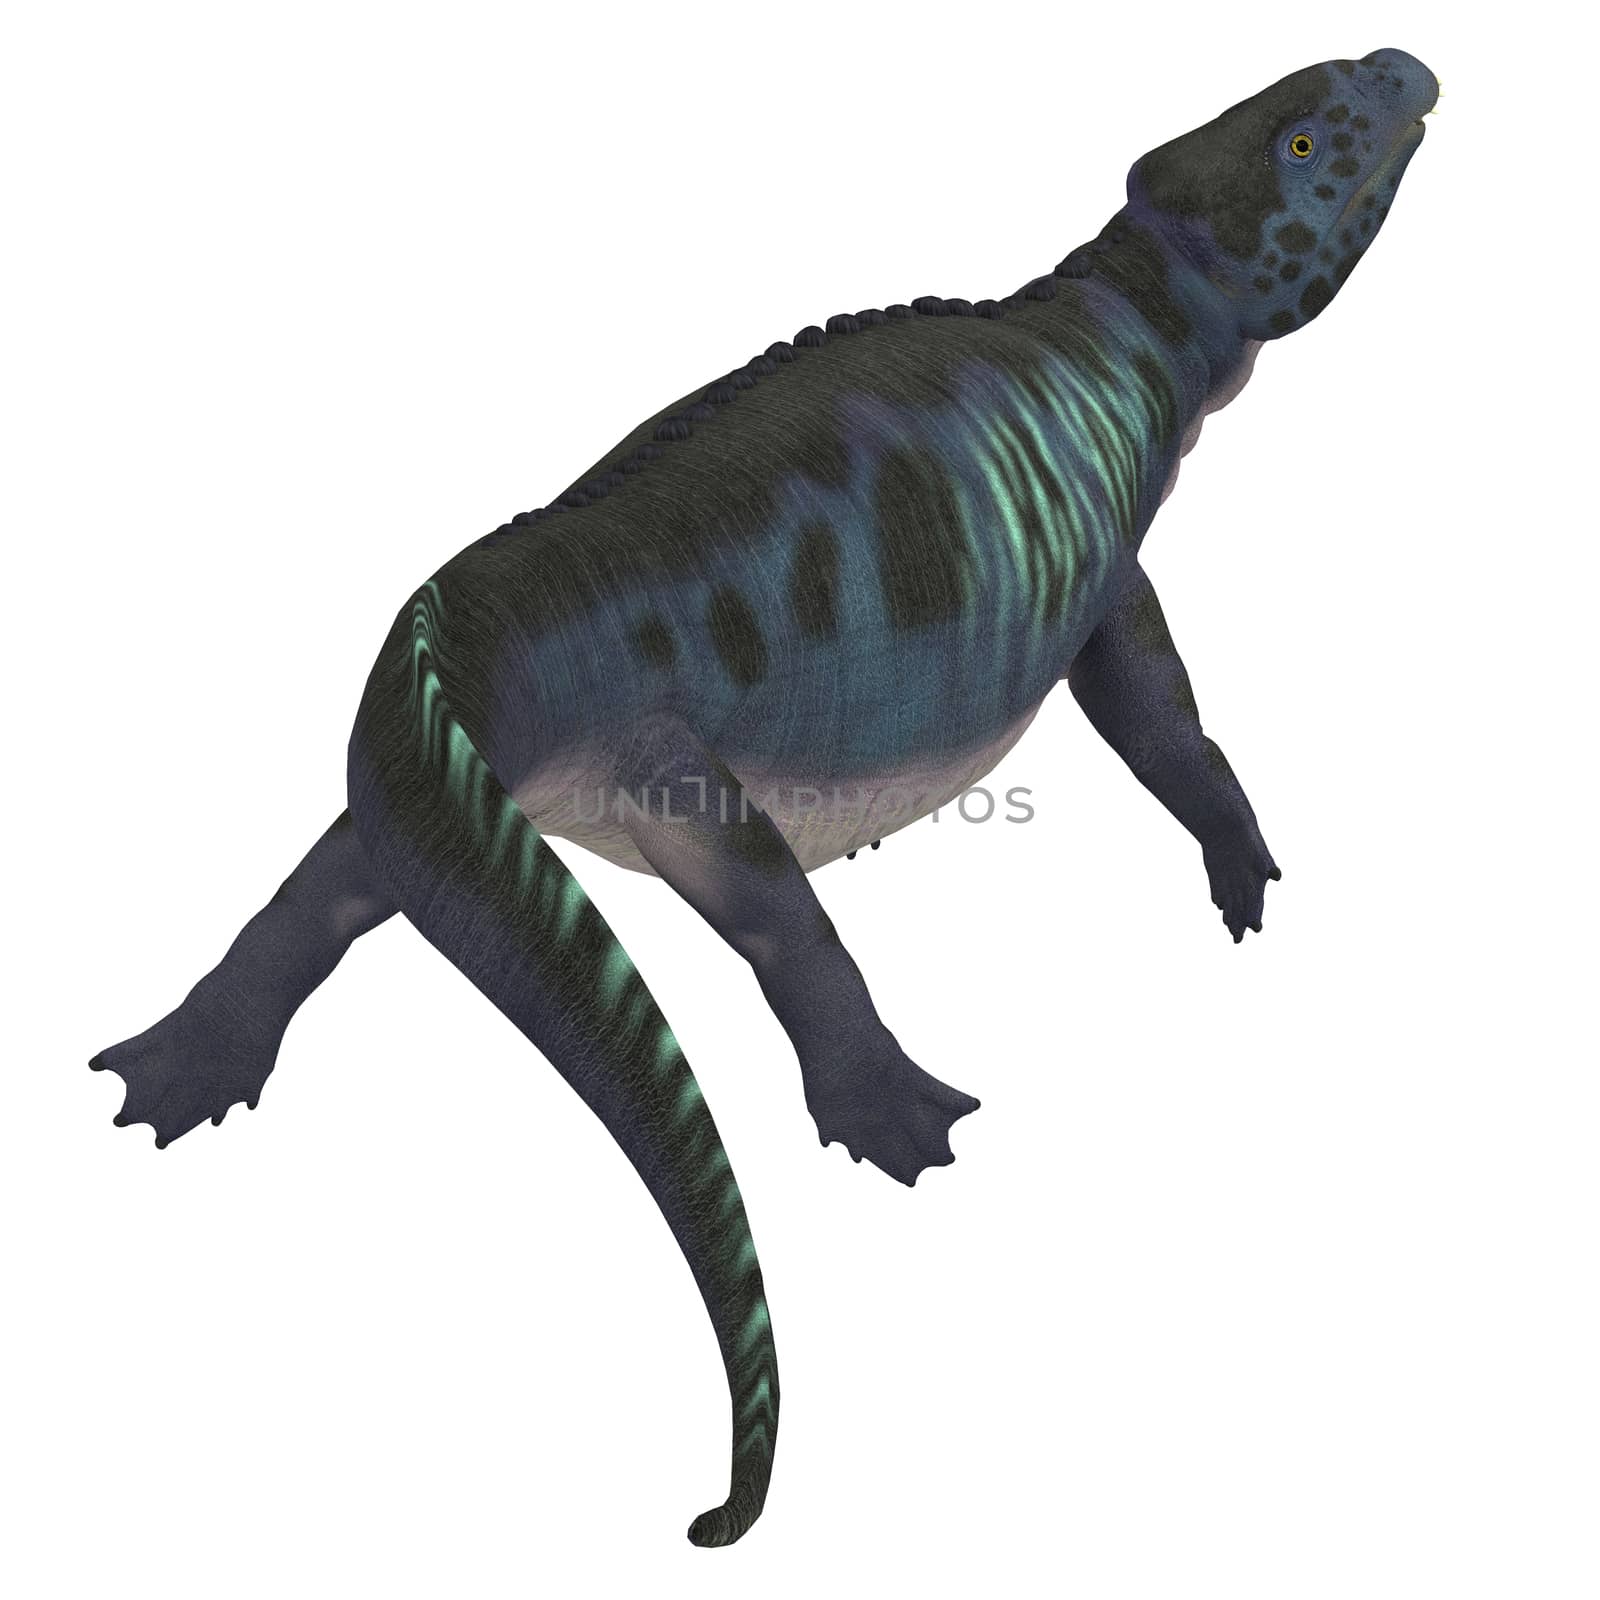 Placodus was a marine reptile that swam in the shallow seas of the Triassic Period in Europe and China.